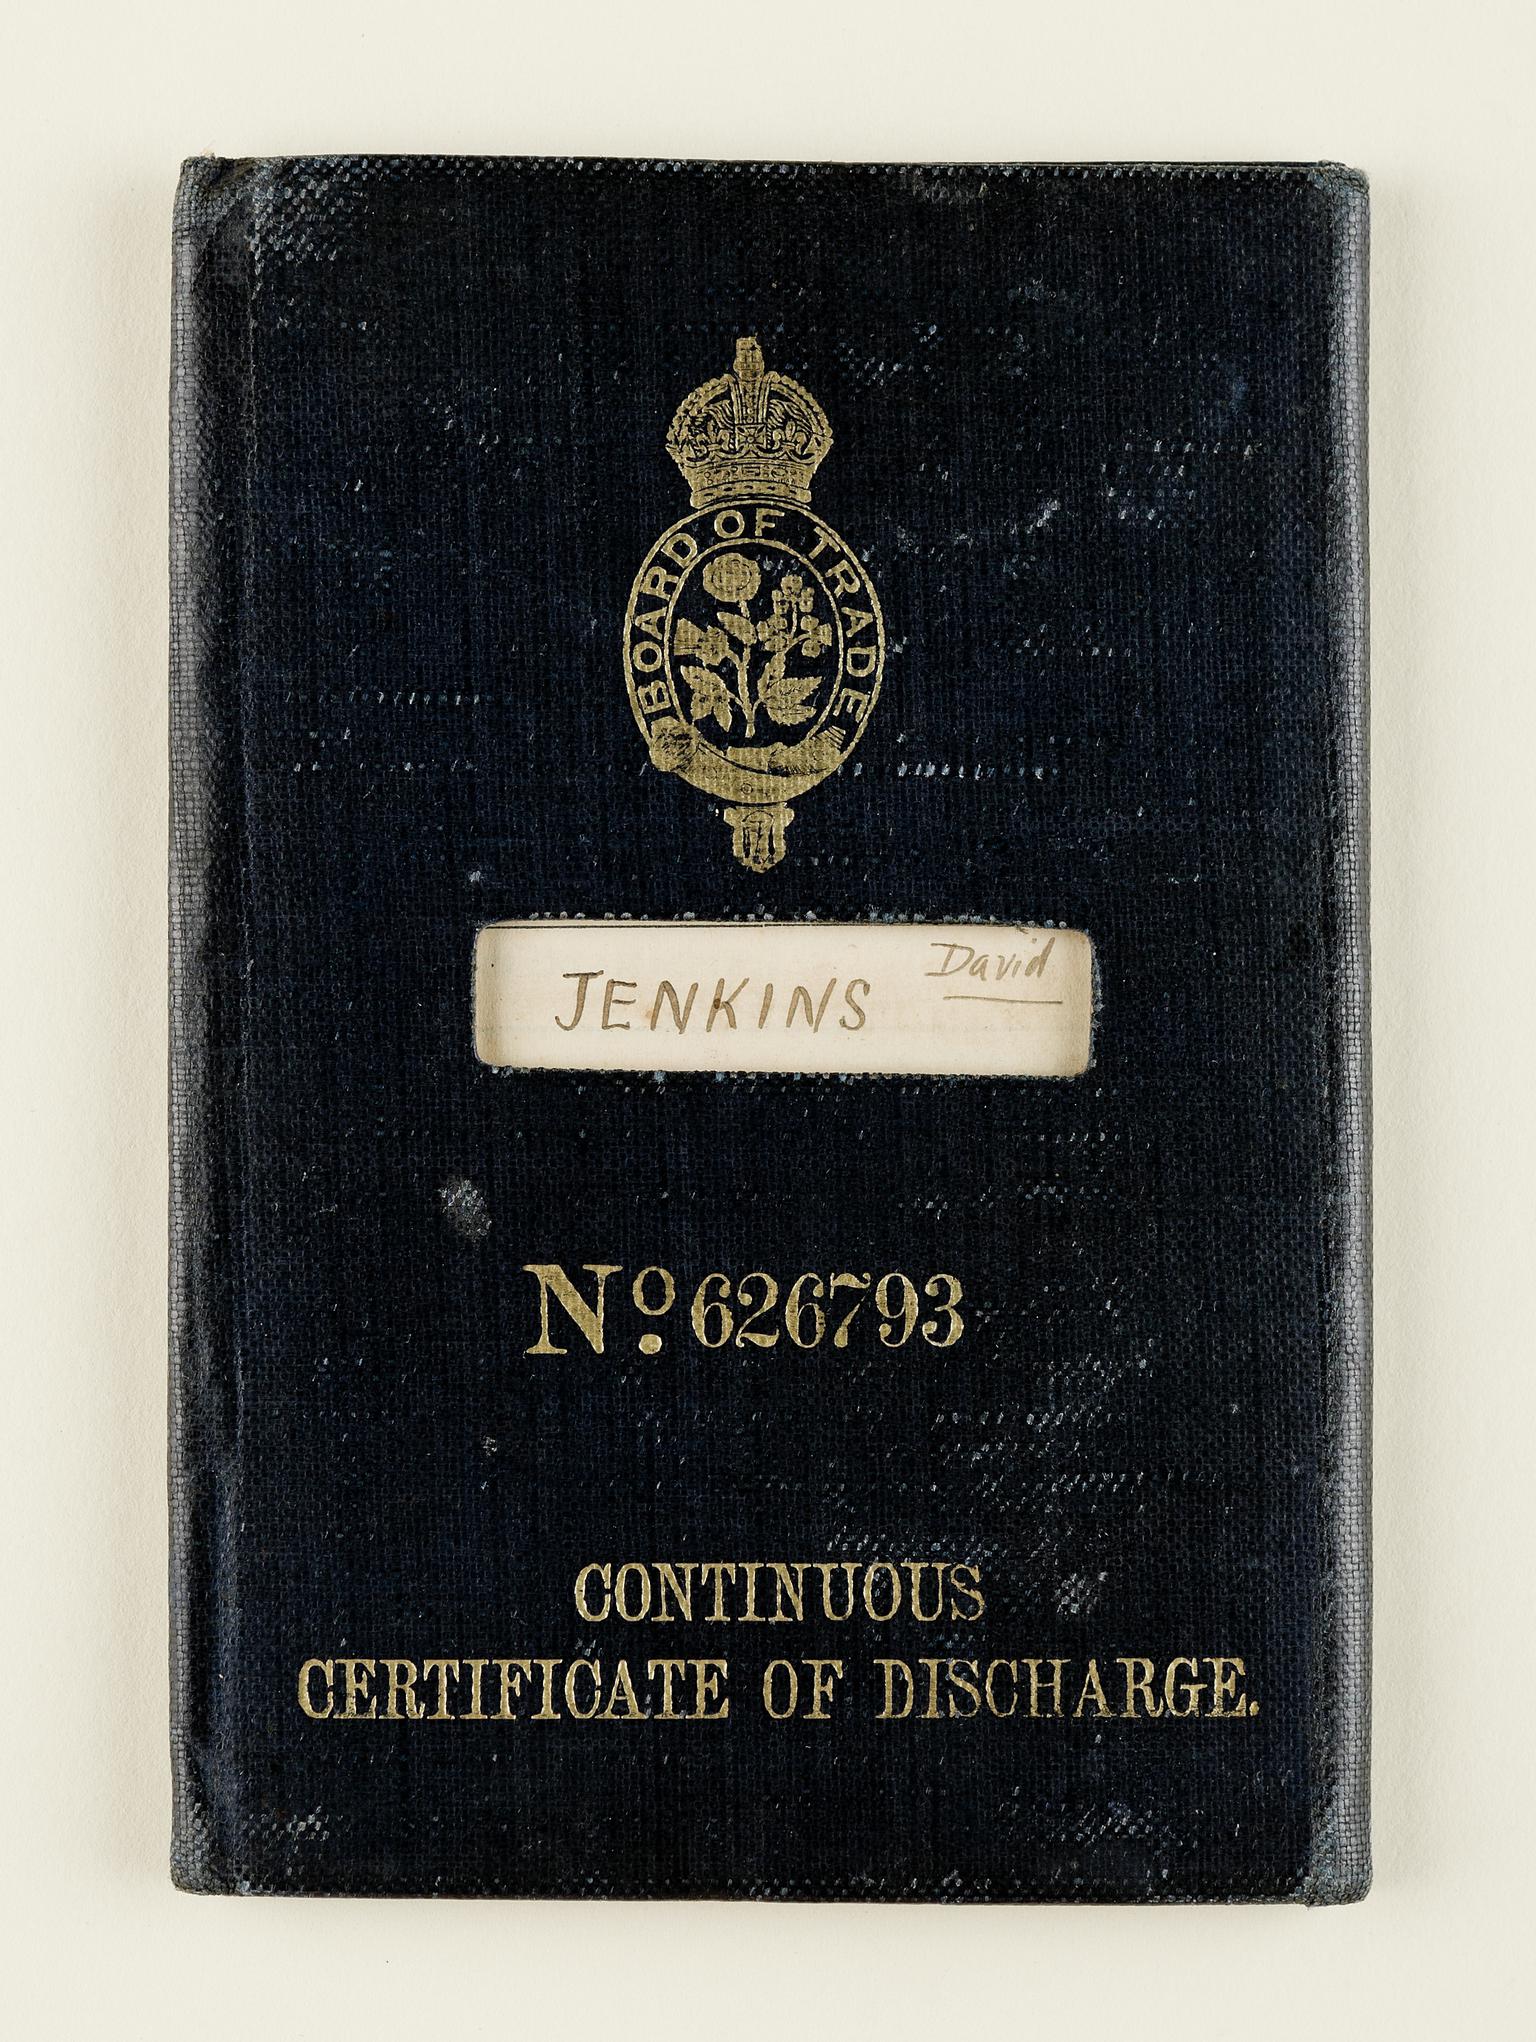 Discharge book issused to David Jenkins